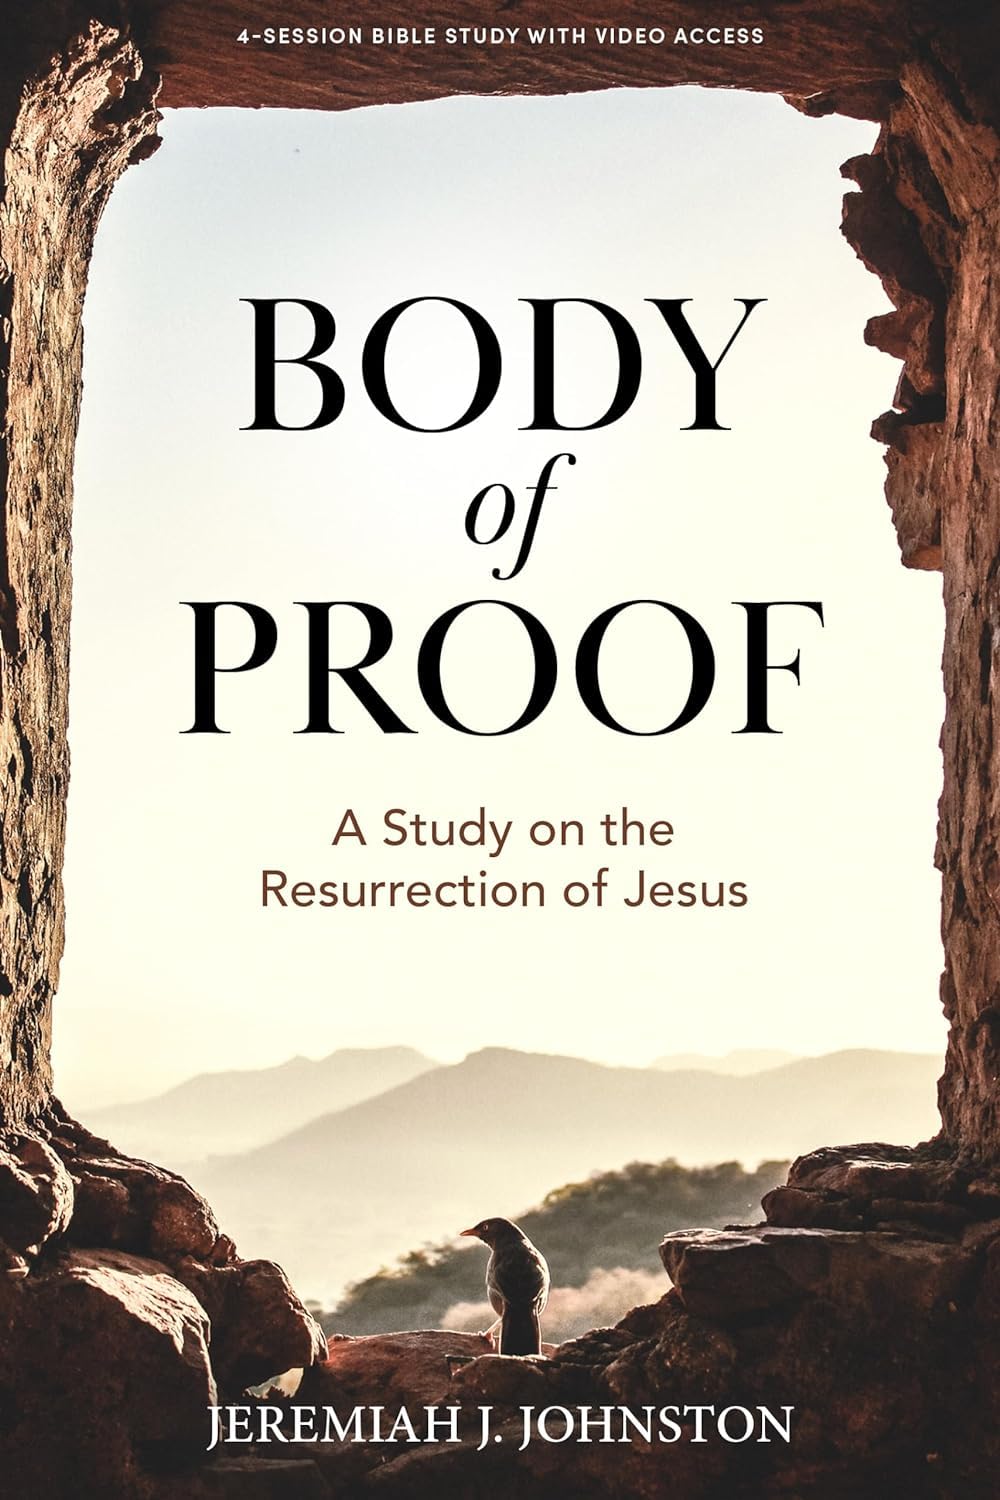 Body of Proof - Bible Study Book with Video Access: A Study on the Resurrection of Jesus